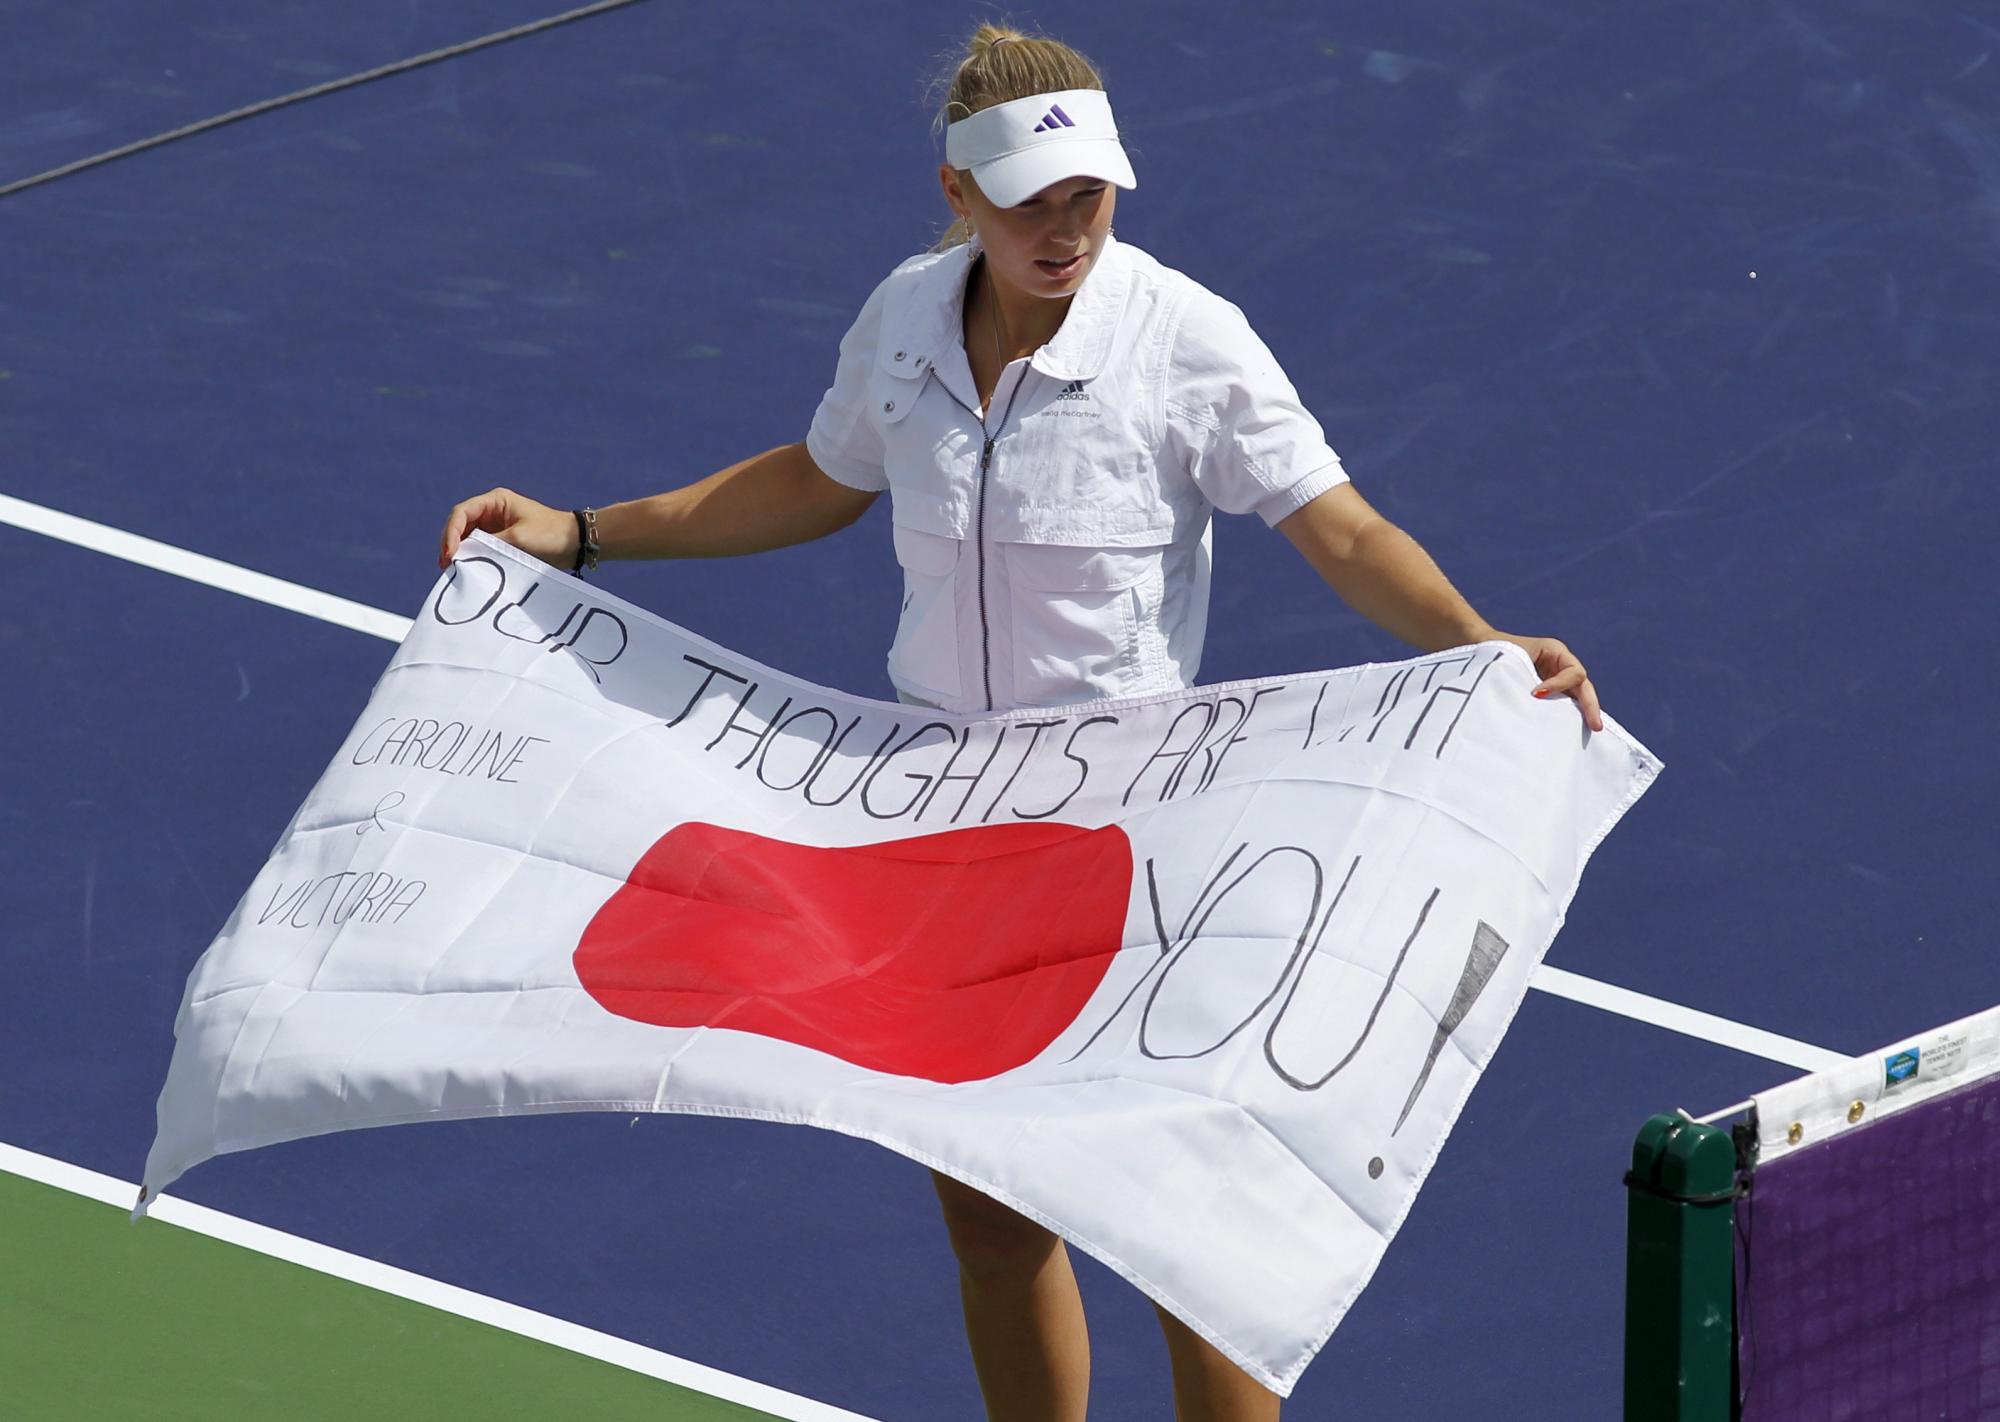 Tribute to Japan on tennis court